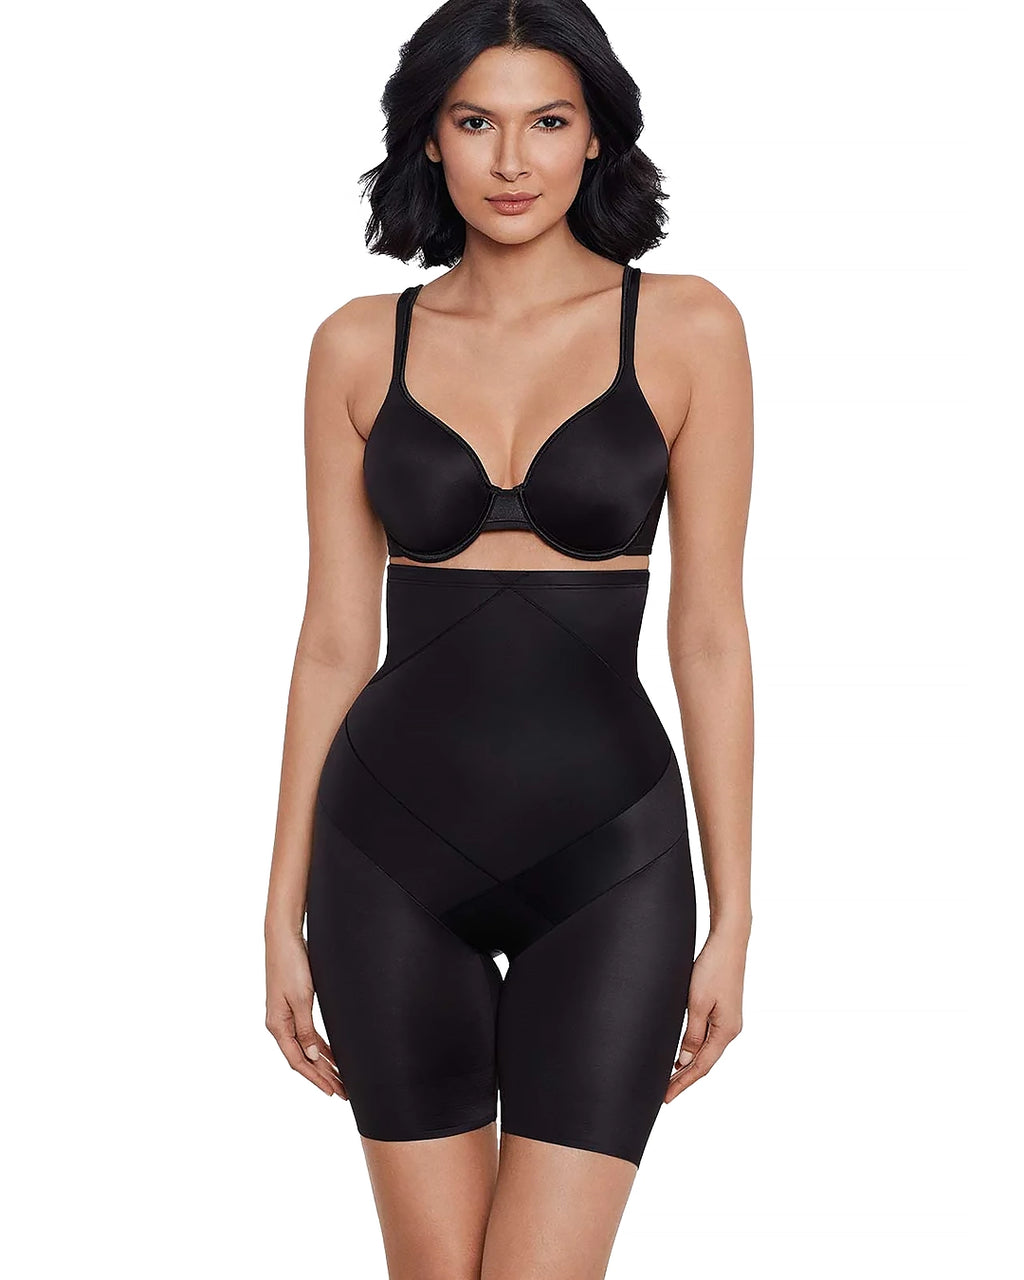 NUDE FIRM CONTROL HIGH WAIST THIGH SHAPEWEAR – Specialty Fittings